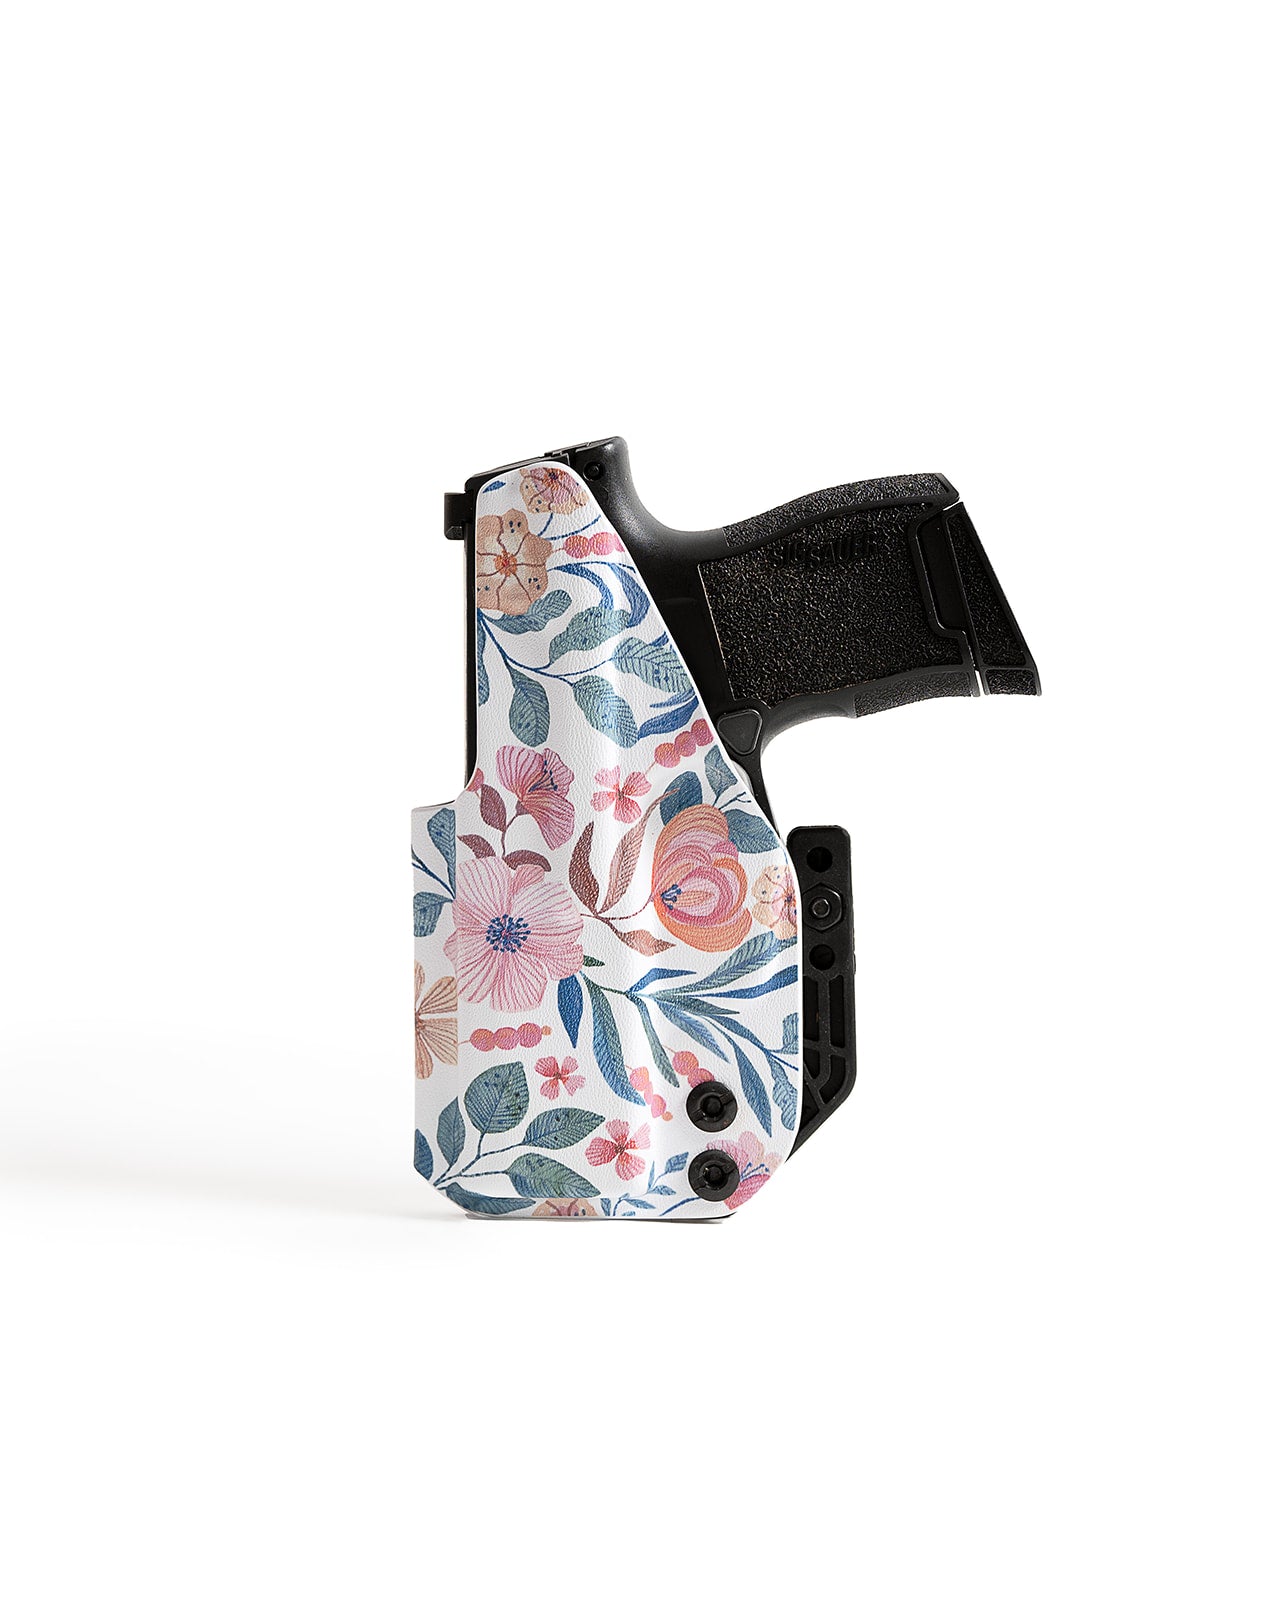 Custom Kydex Holsters For Women Concealed Carry – Southern Bullets